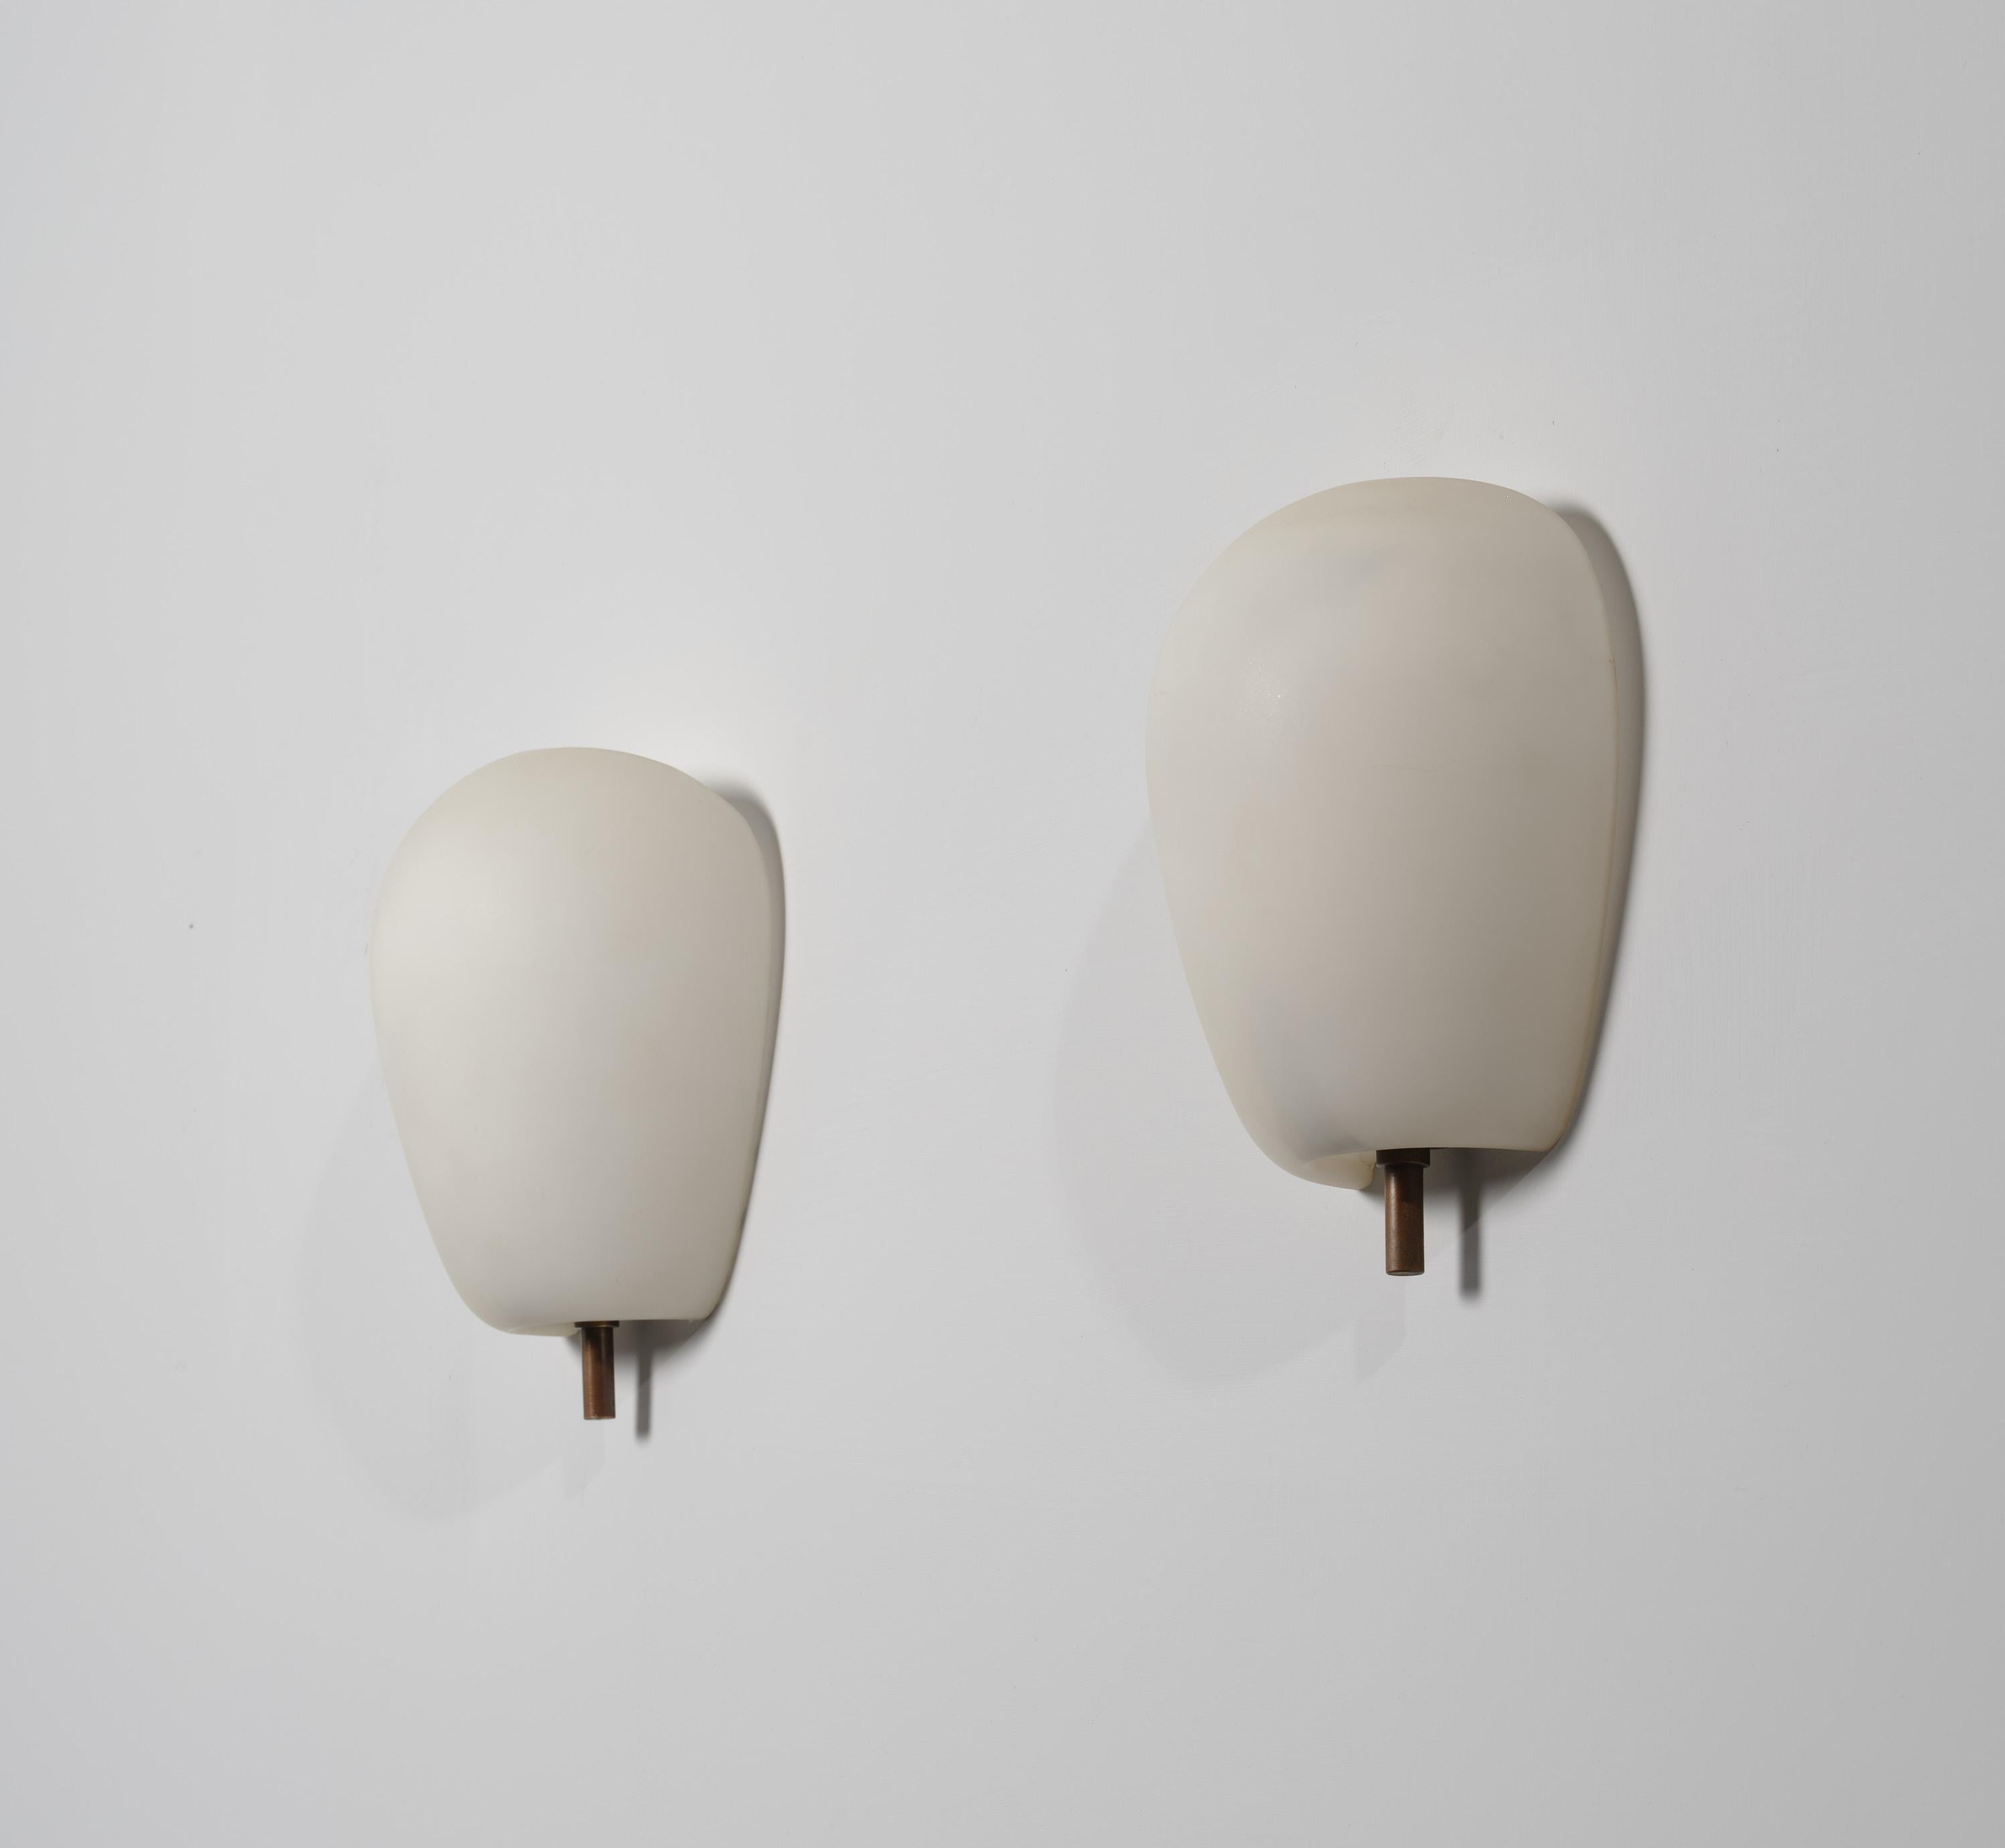 Mid-Century Modern Pair of Italian Design Wall Sconces from the 1950s - Fontana Arte Attribution